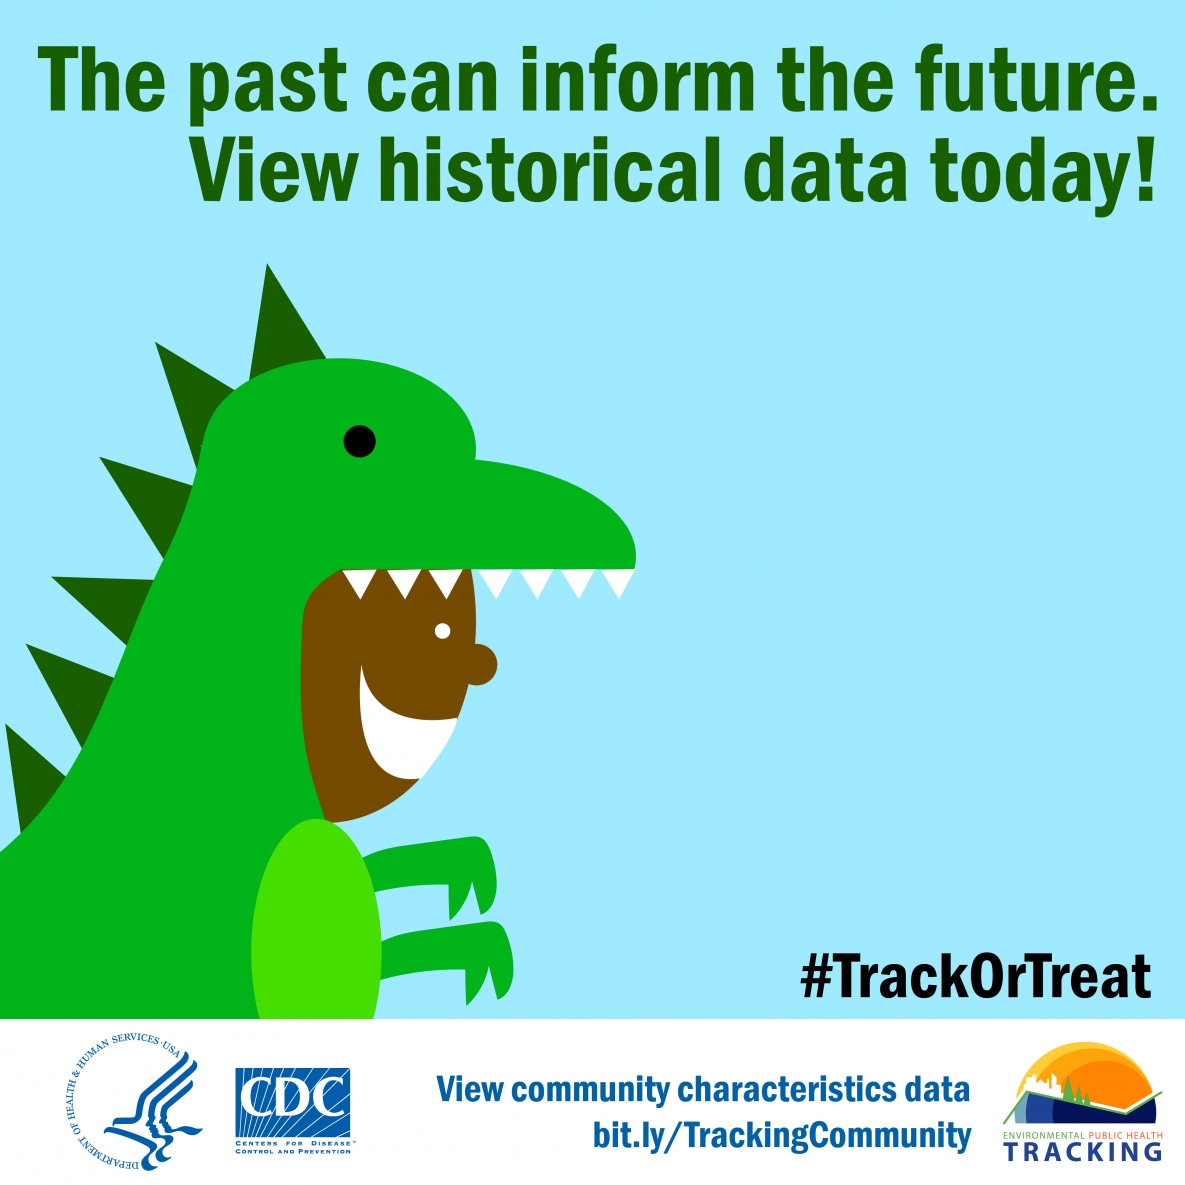 Person wearing dinosaur costume with text overlay: The past can inform the future. View historical data today!